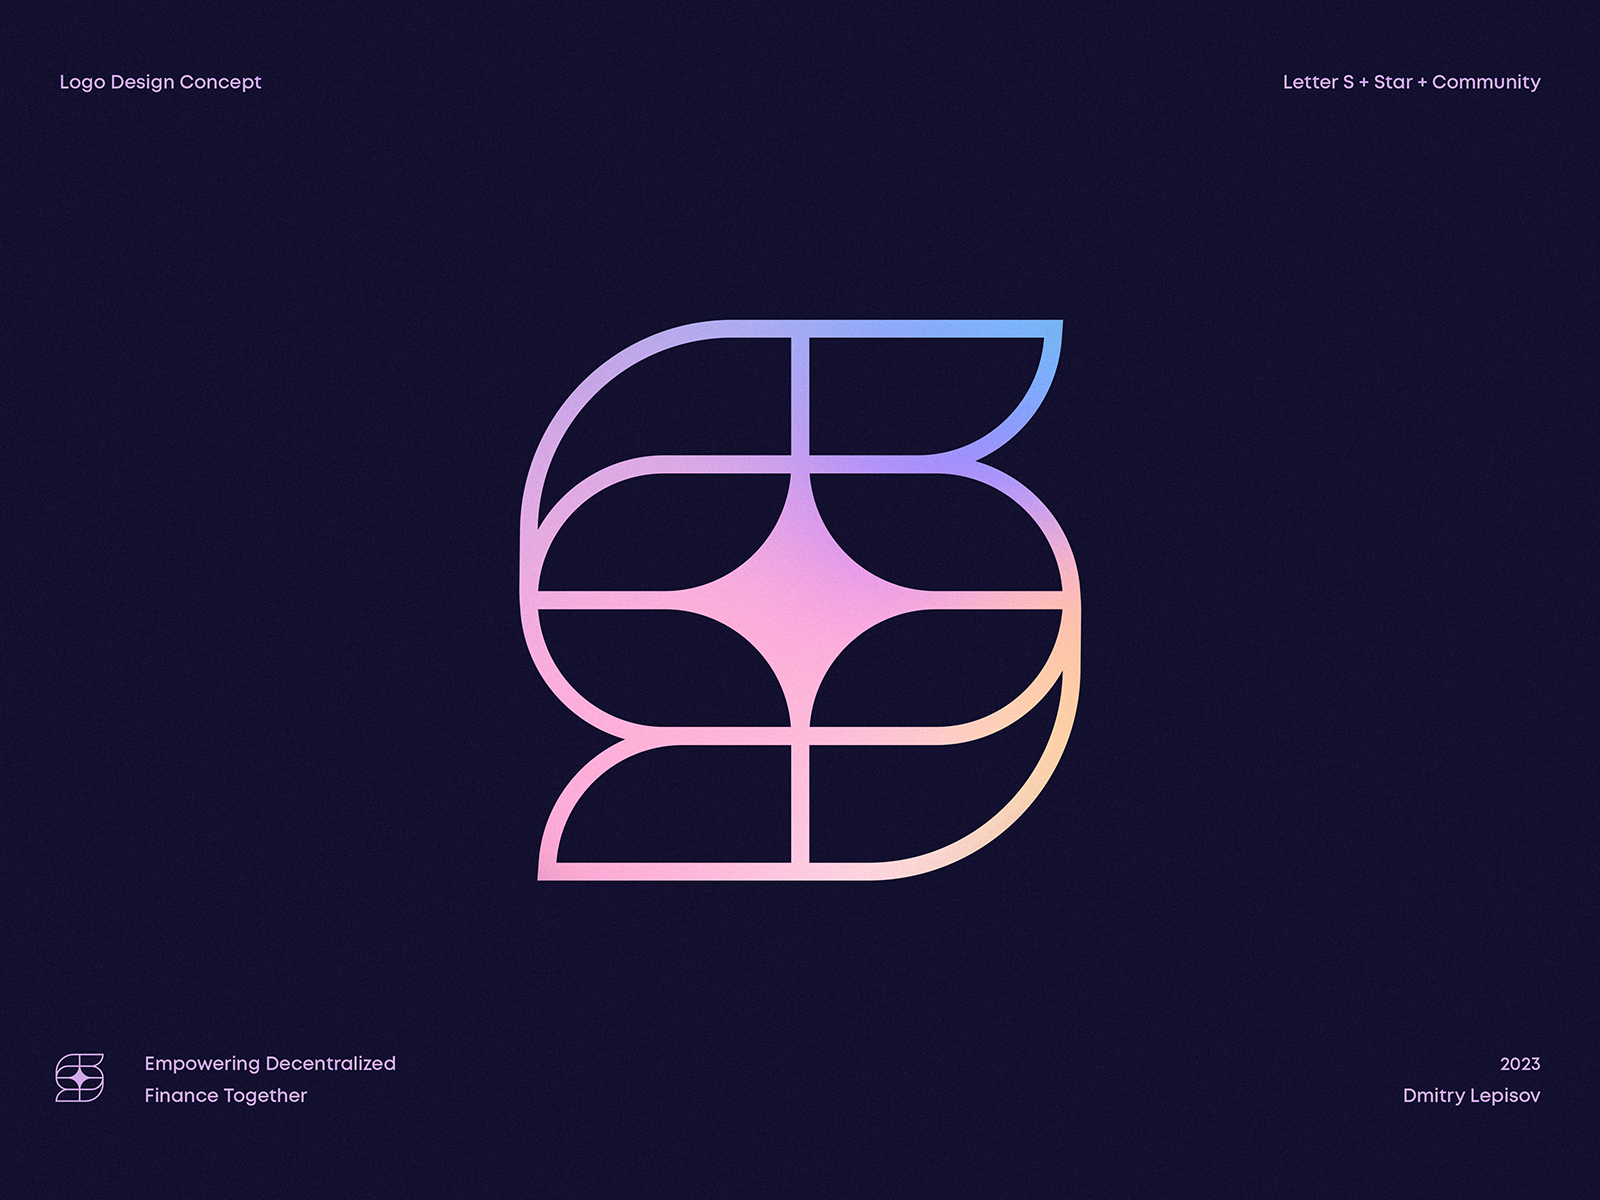 Letter S Star designs, themes, templates and downloadable graphic elements  on Dribbble